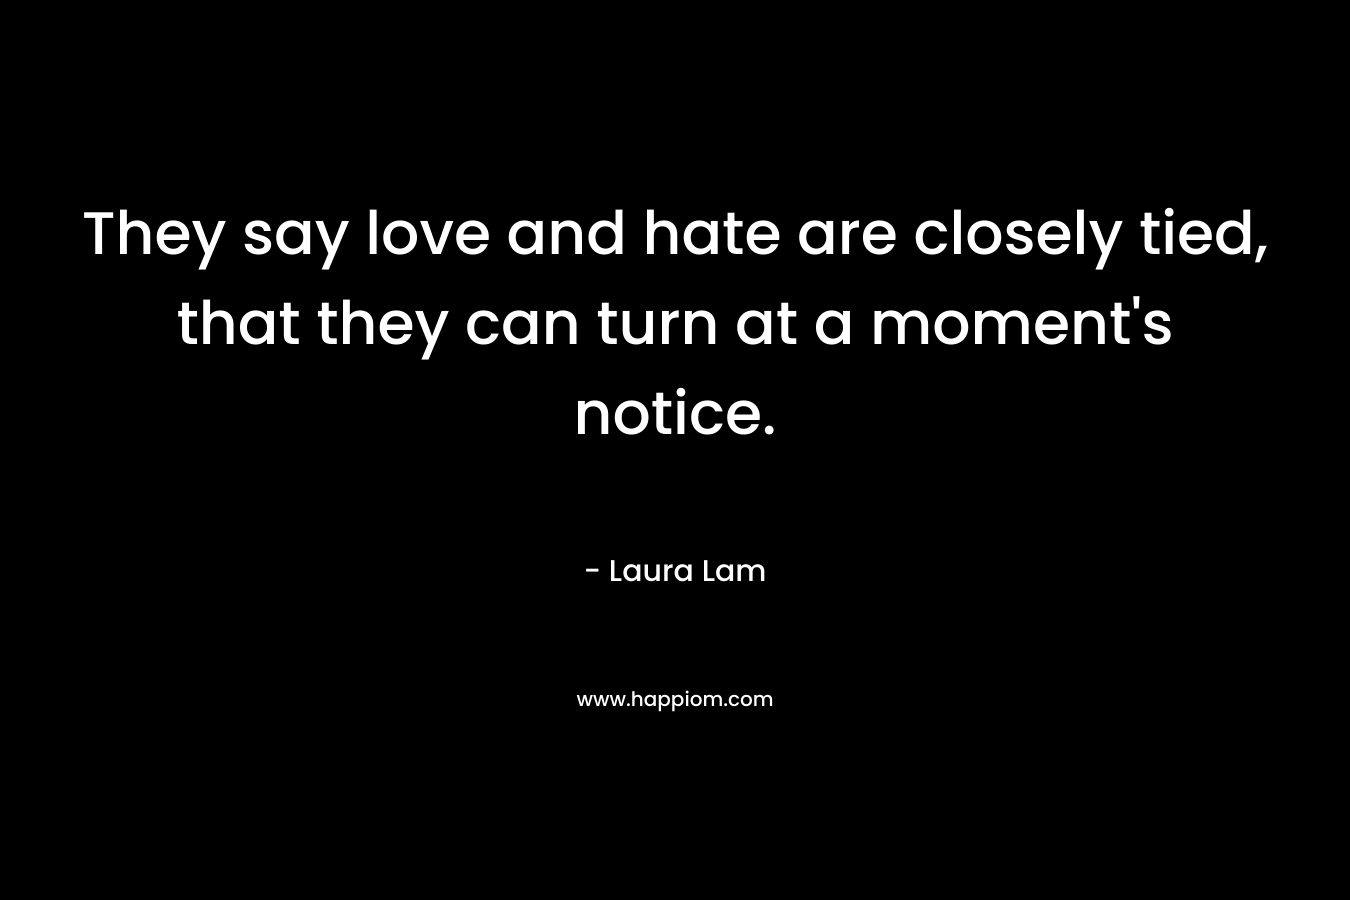 They say love and hate are closely tied, that they can turn at a moment's notice.